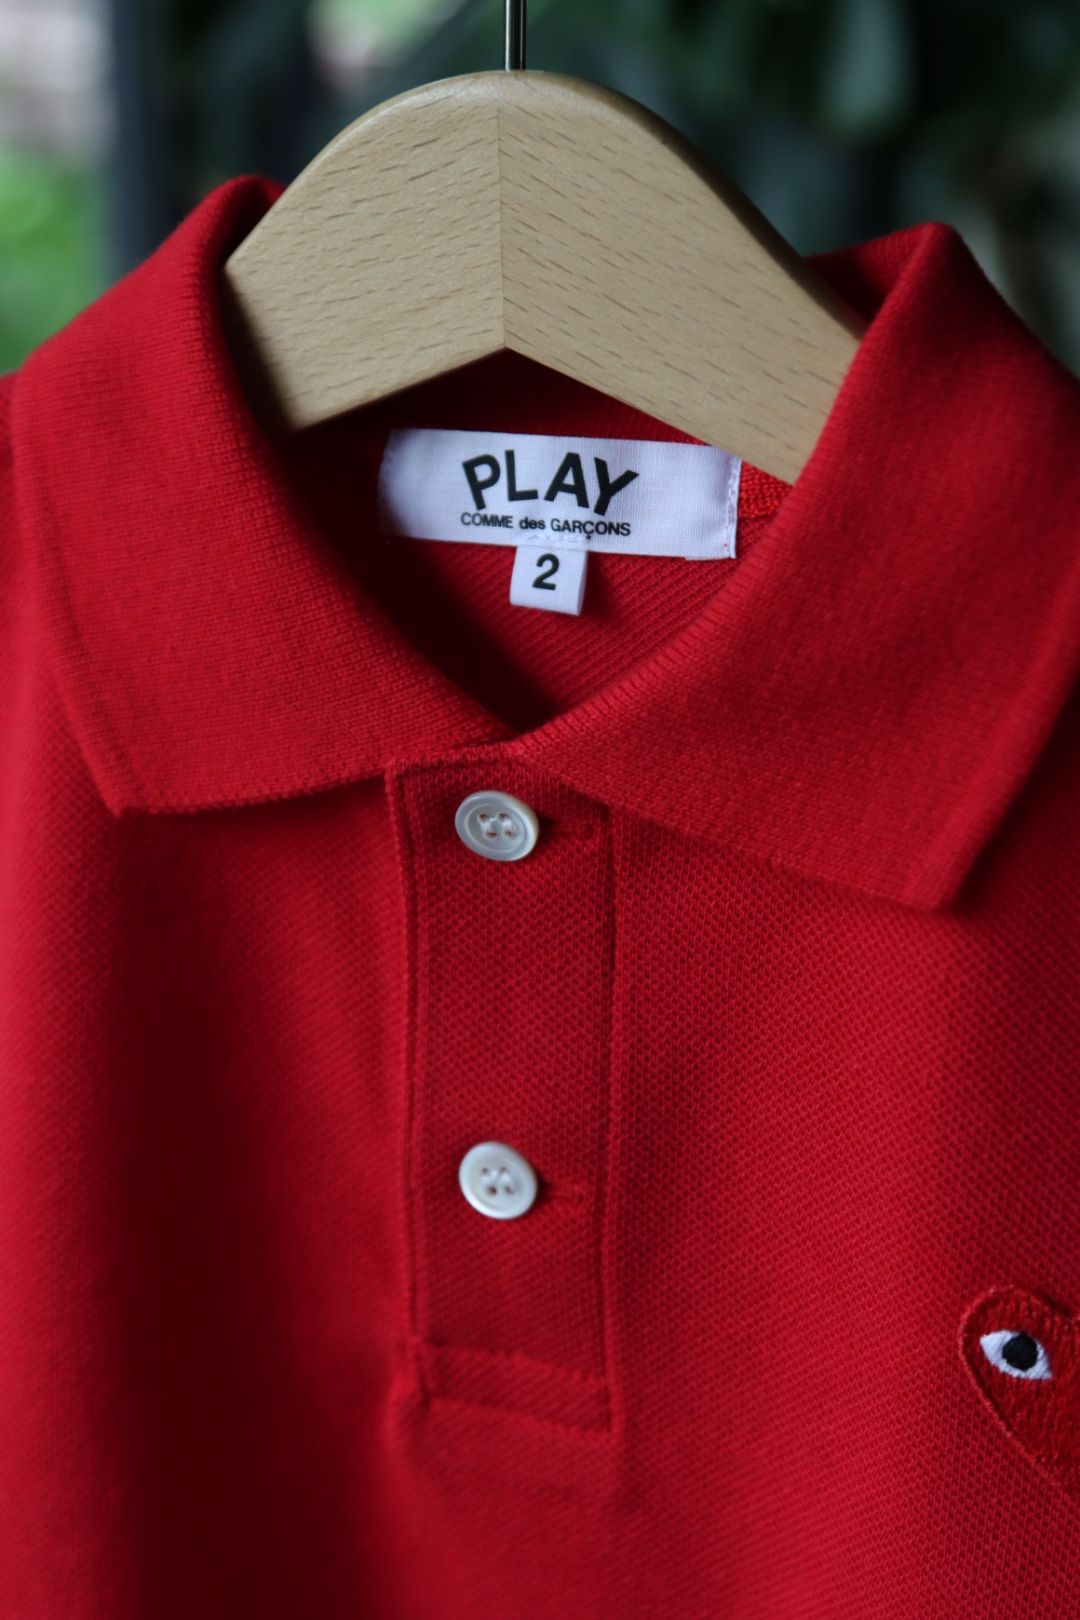 PLAY COMME des GARCONS - プレイコムデギャルソン KID'S子供服 ...